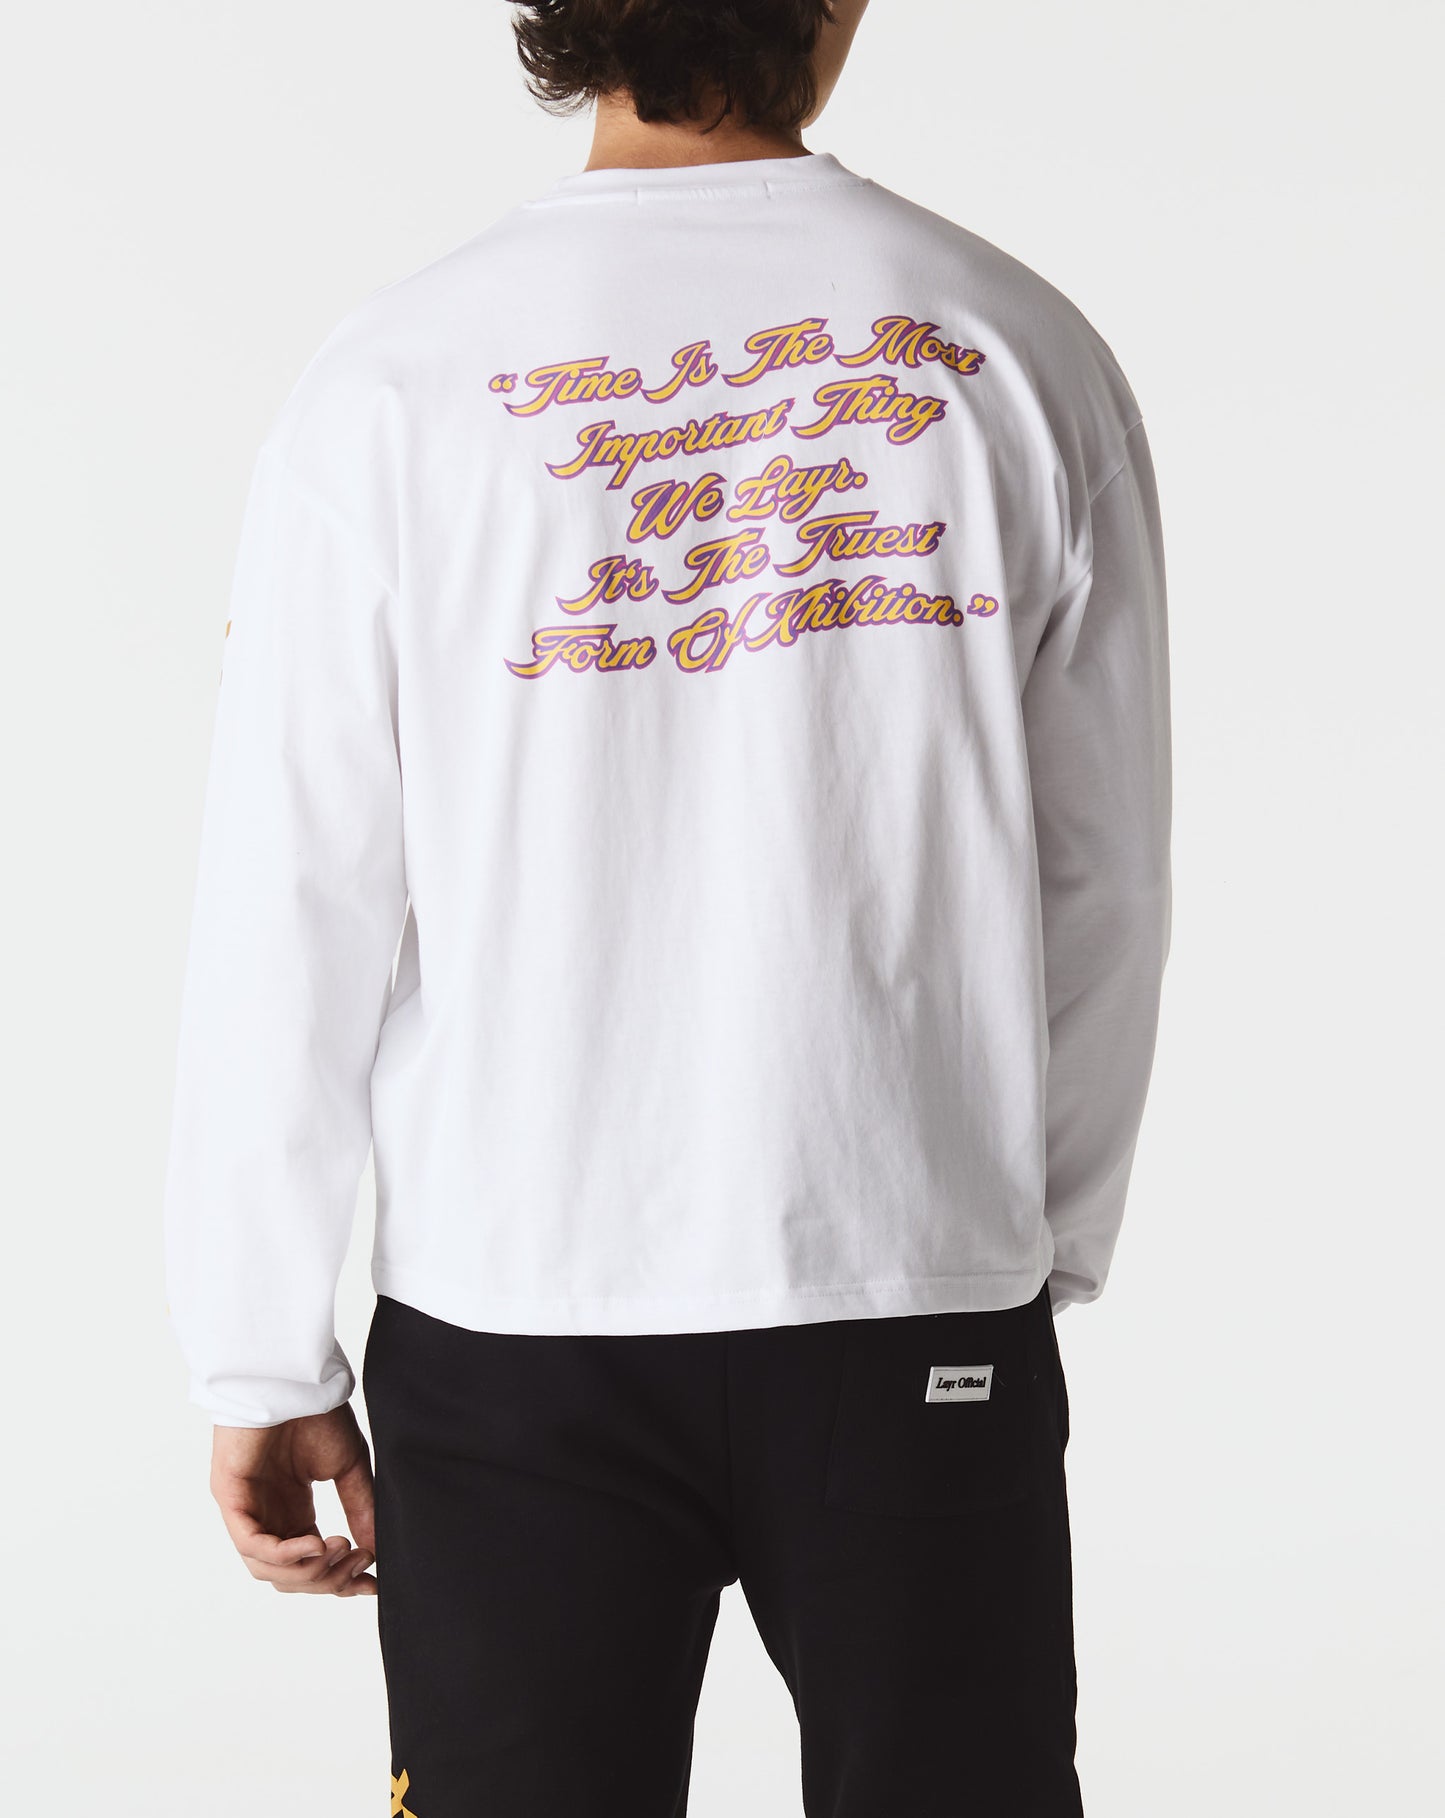 Layr x Xhibition "Definition" Long Sleeve Tee, White